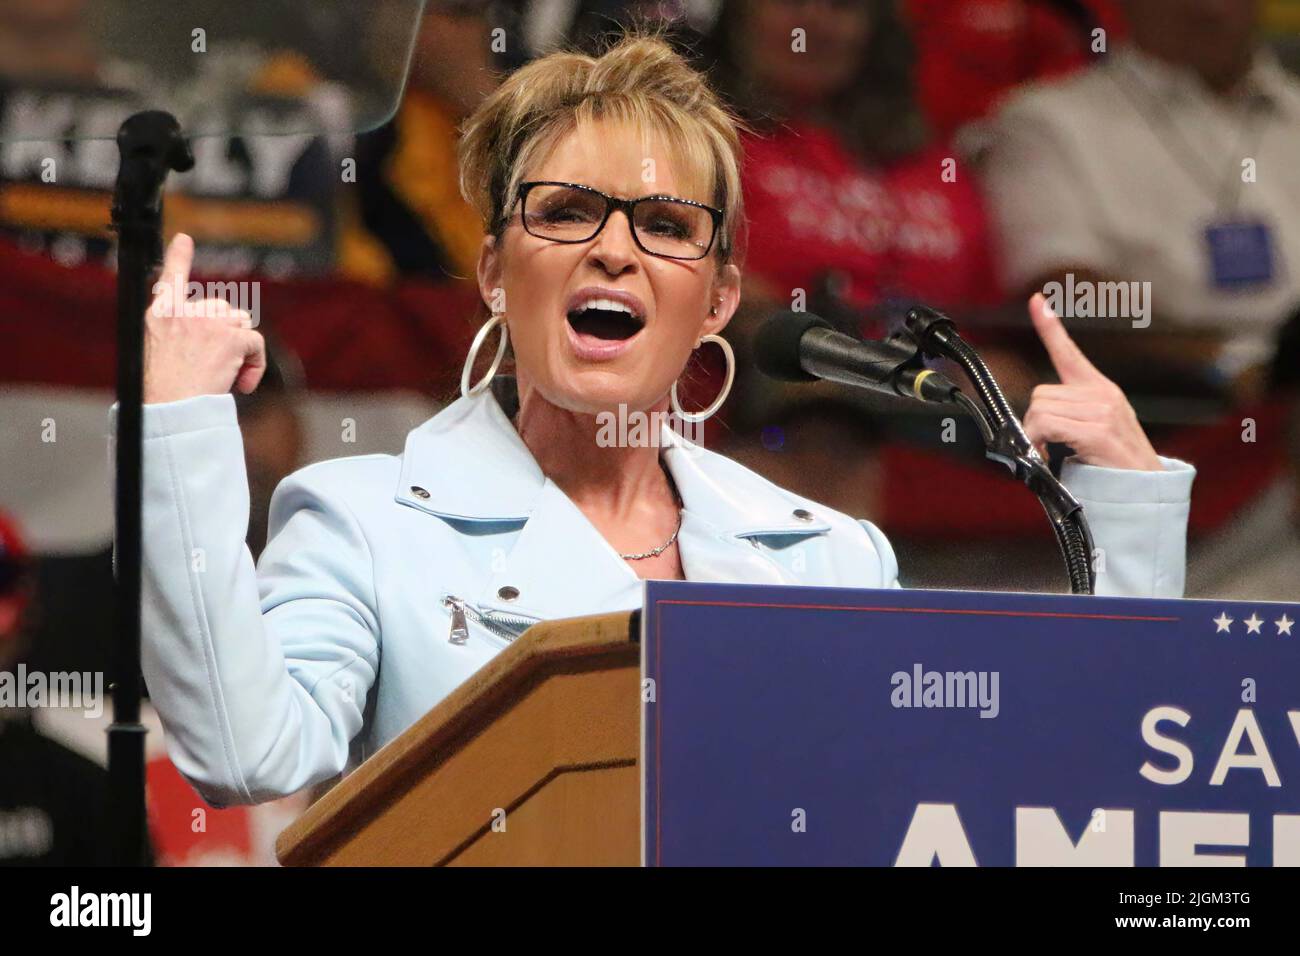 Anchorage, Alaska, USA. 9th July, 2022. Former Alaska Governor and Vice President candidate Sarah Palin speaks during a Save America rally. Palin, who is endorsed by President Donald Trump, is running for Alaska's congressional seat left vacant by the death of Congressman Don Young. Credit: Al Grillo/ZUMA Press Wire Service/ZUMAPRESS.com/Alamy Live News Stock Photo